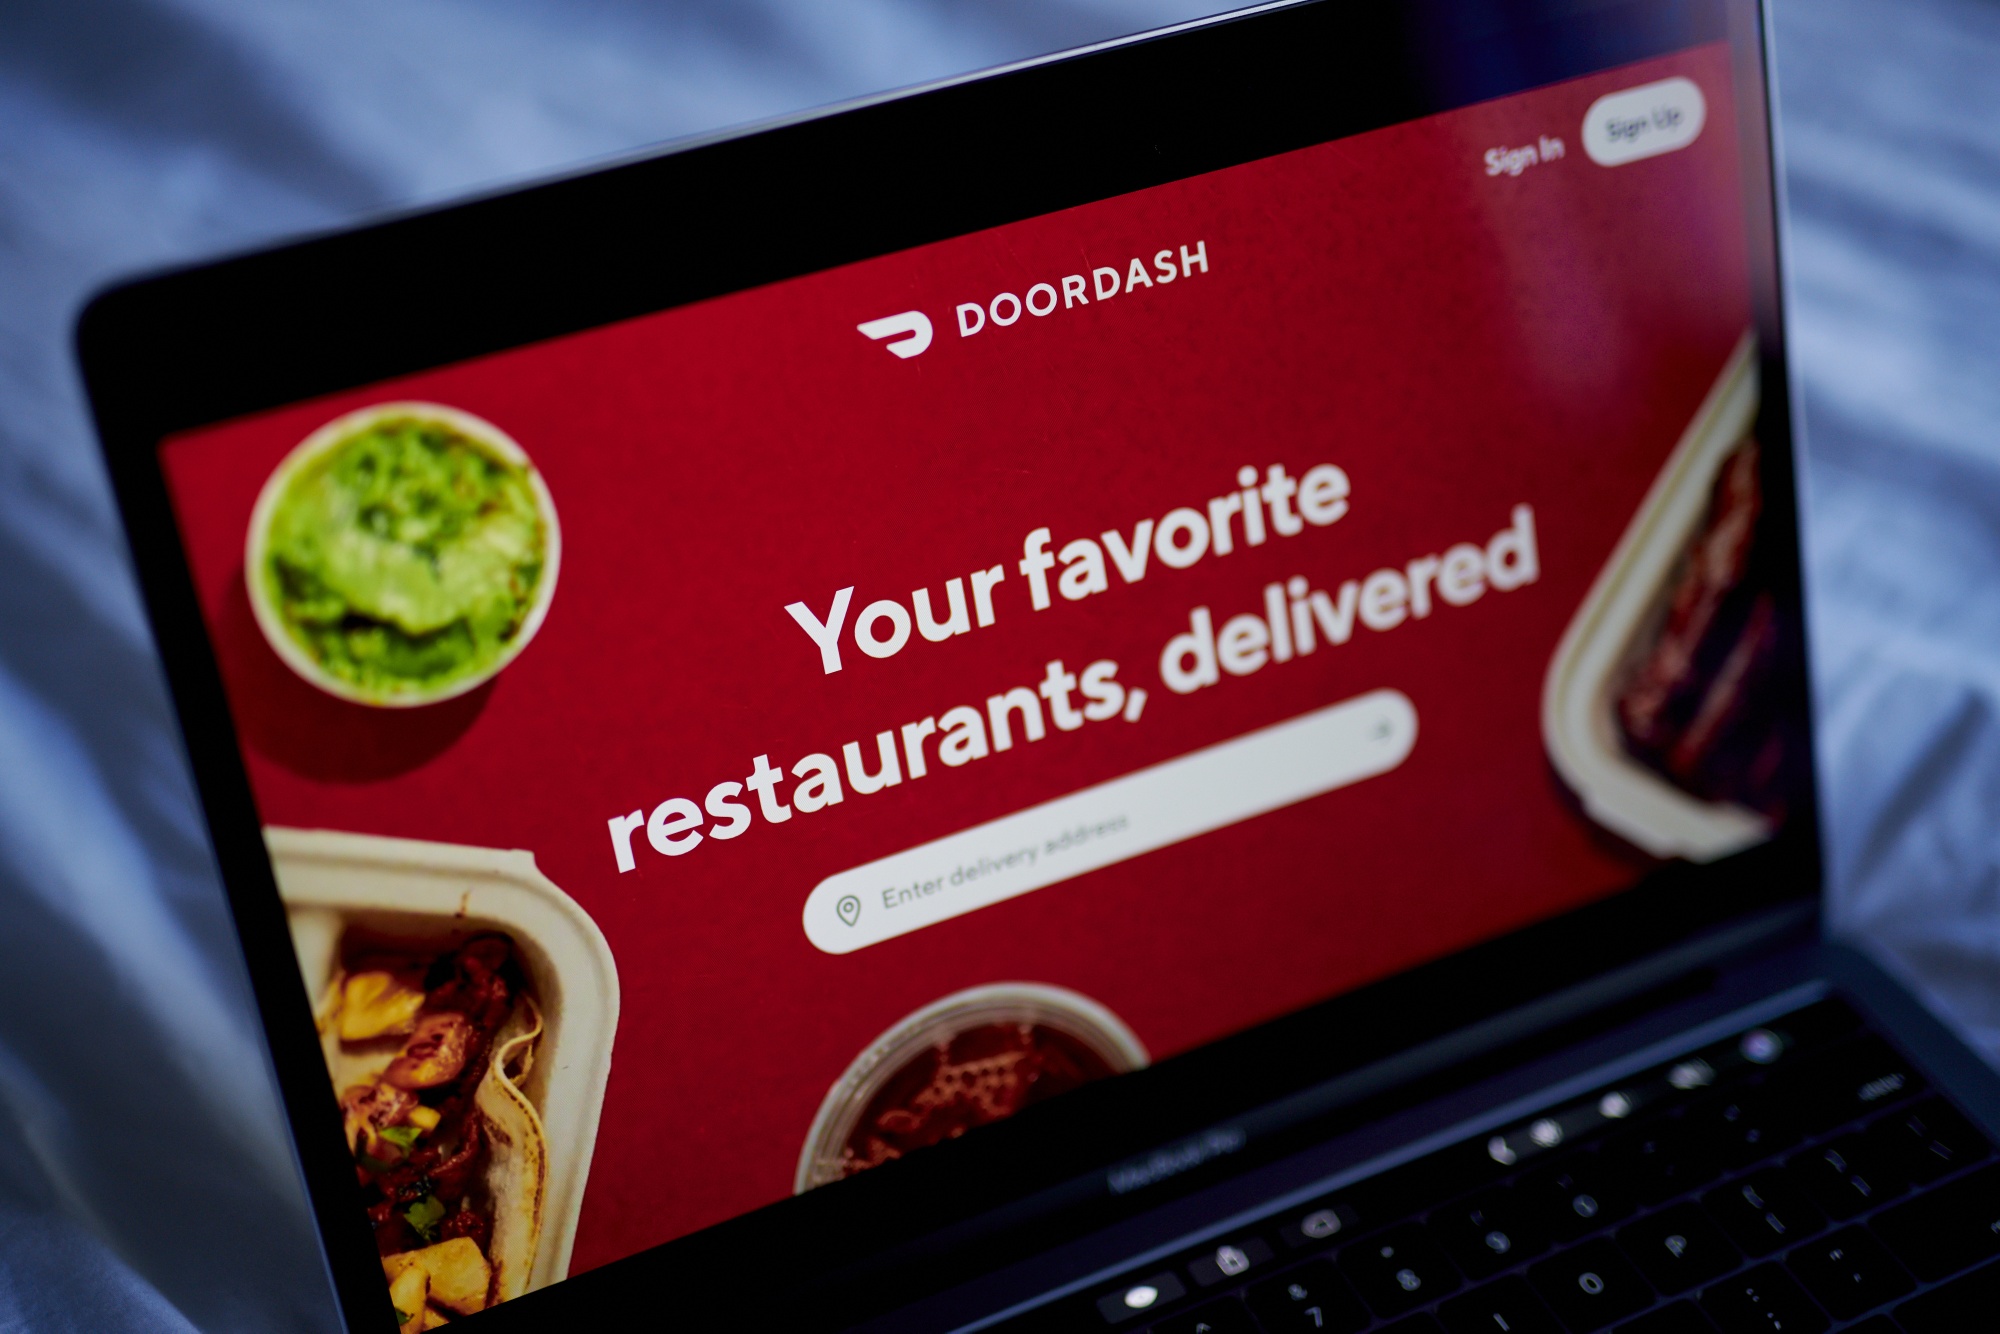 Today in the Connected Economy: DoorDash Unveils Its First Credit